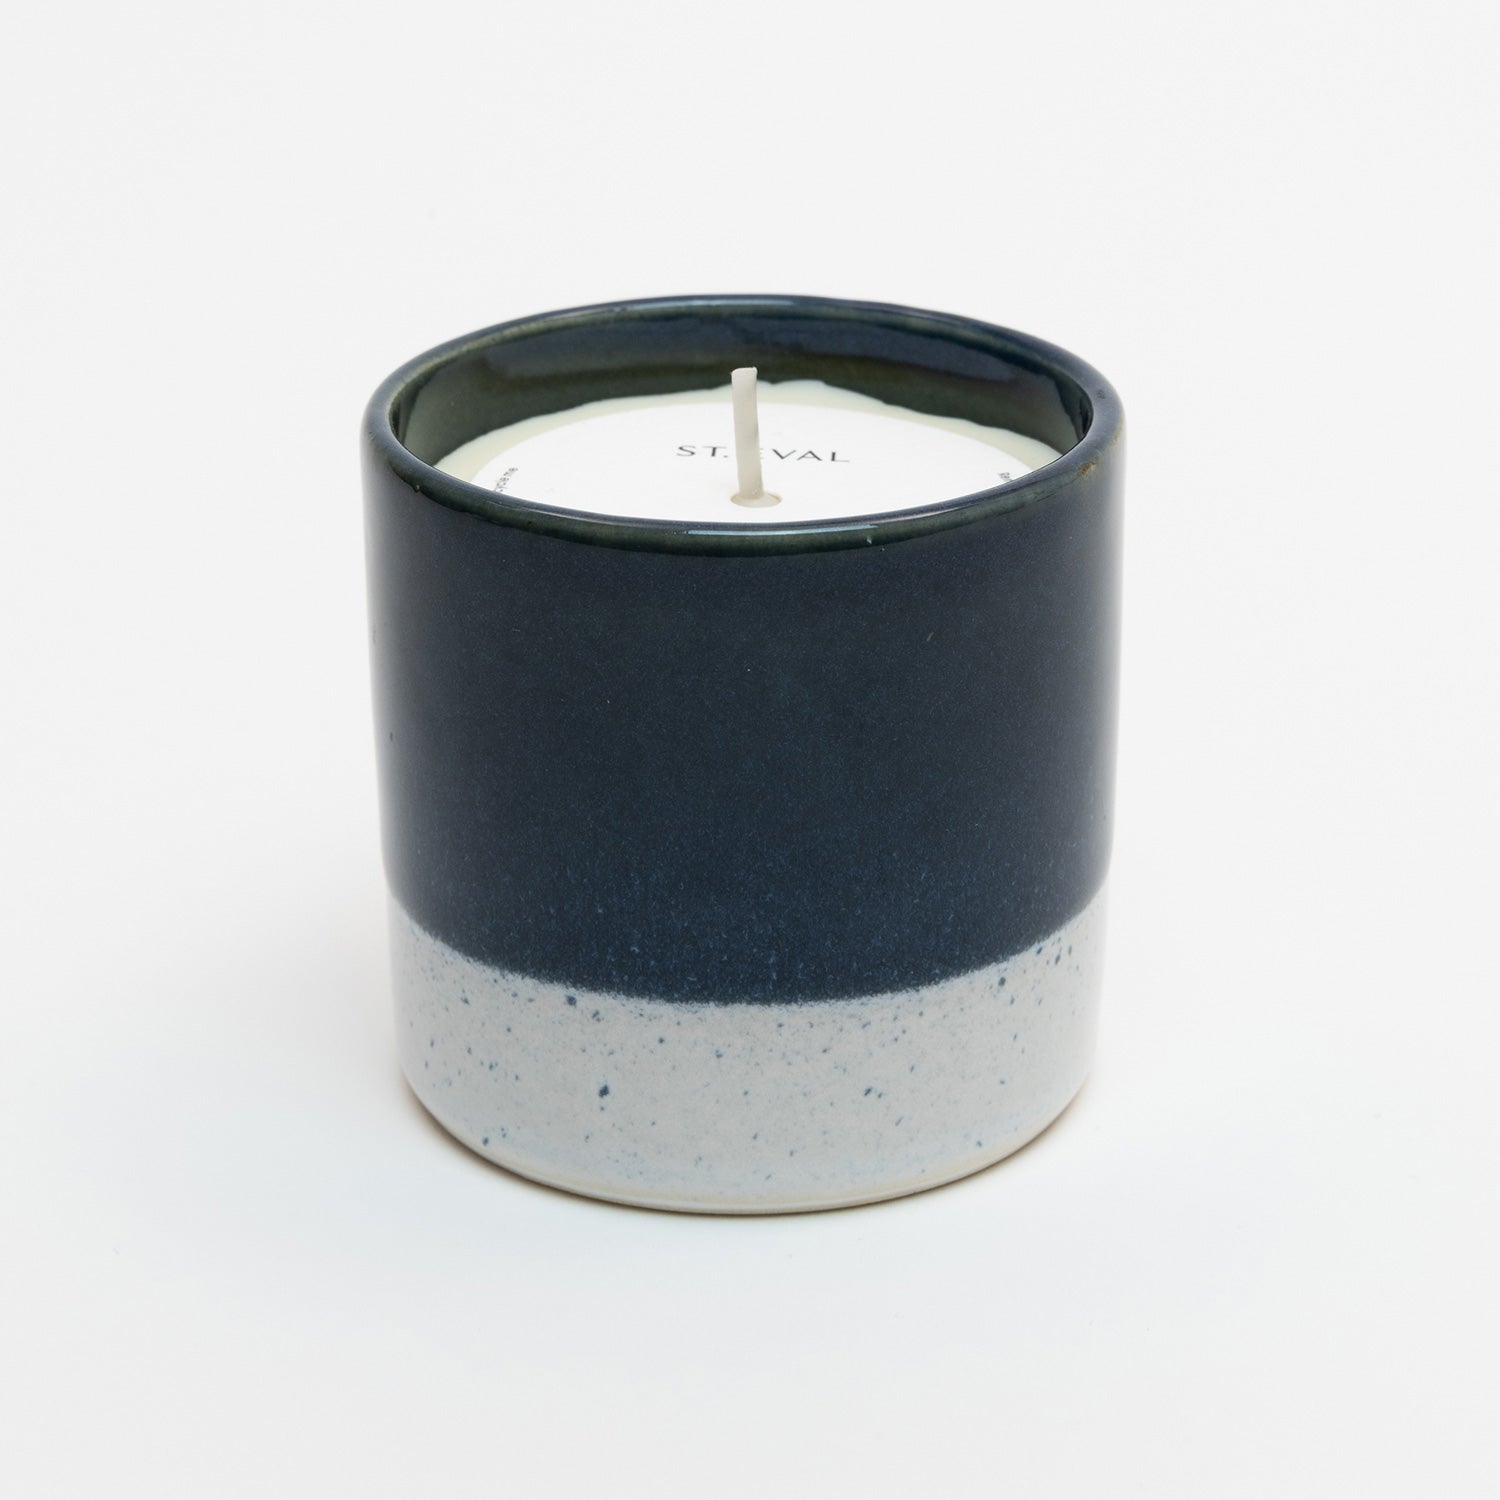 St Eval Sea & Shore Salt candle pot. Stoneware ceramic pot. Navy blue top with grey ring at base. St Eval card circle protector on top of candle with wick standing tall.